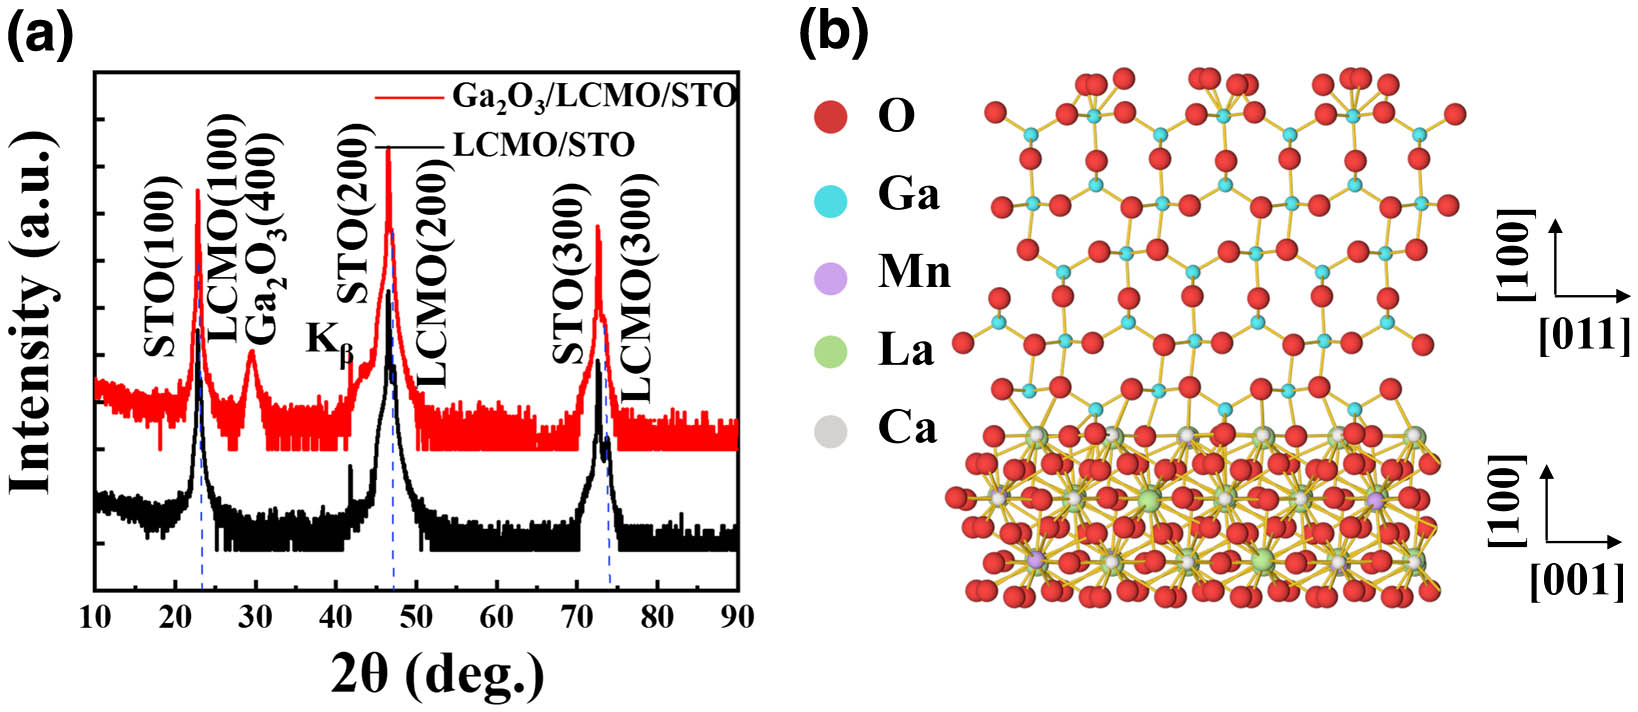 (a) XRD patterns of β-Ga2O3/LCMO/STO (red line) and LCMO/STO (black line); (b) atomic diagram of cross section in the (100) direction of pn junction.